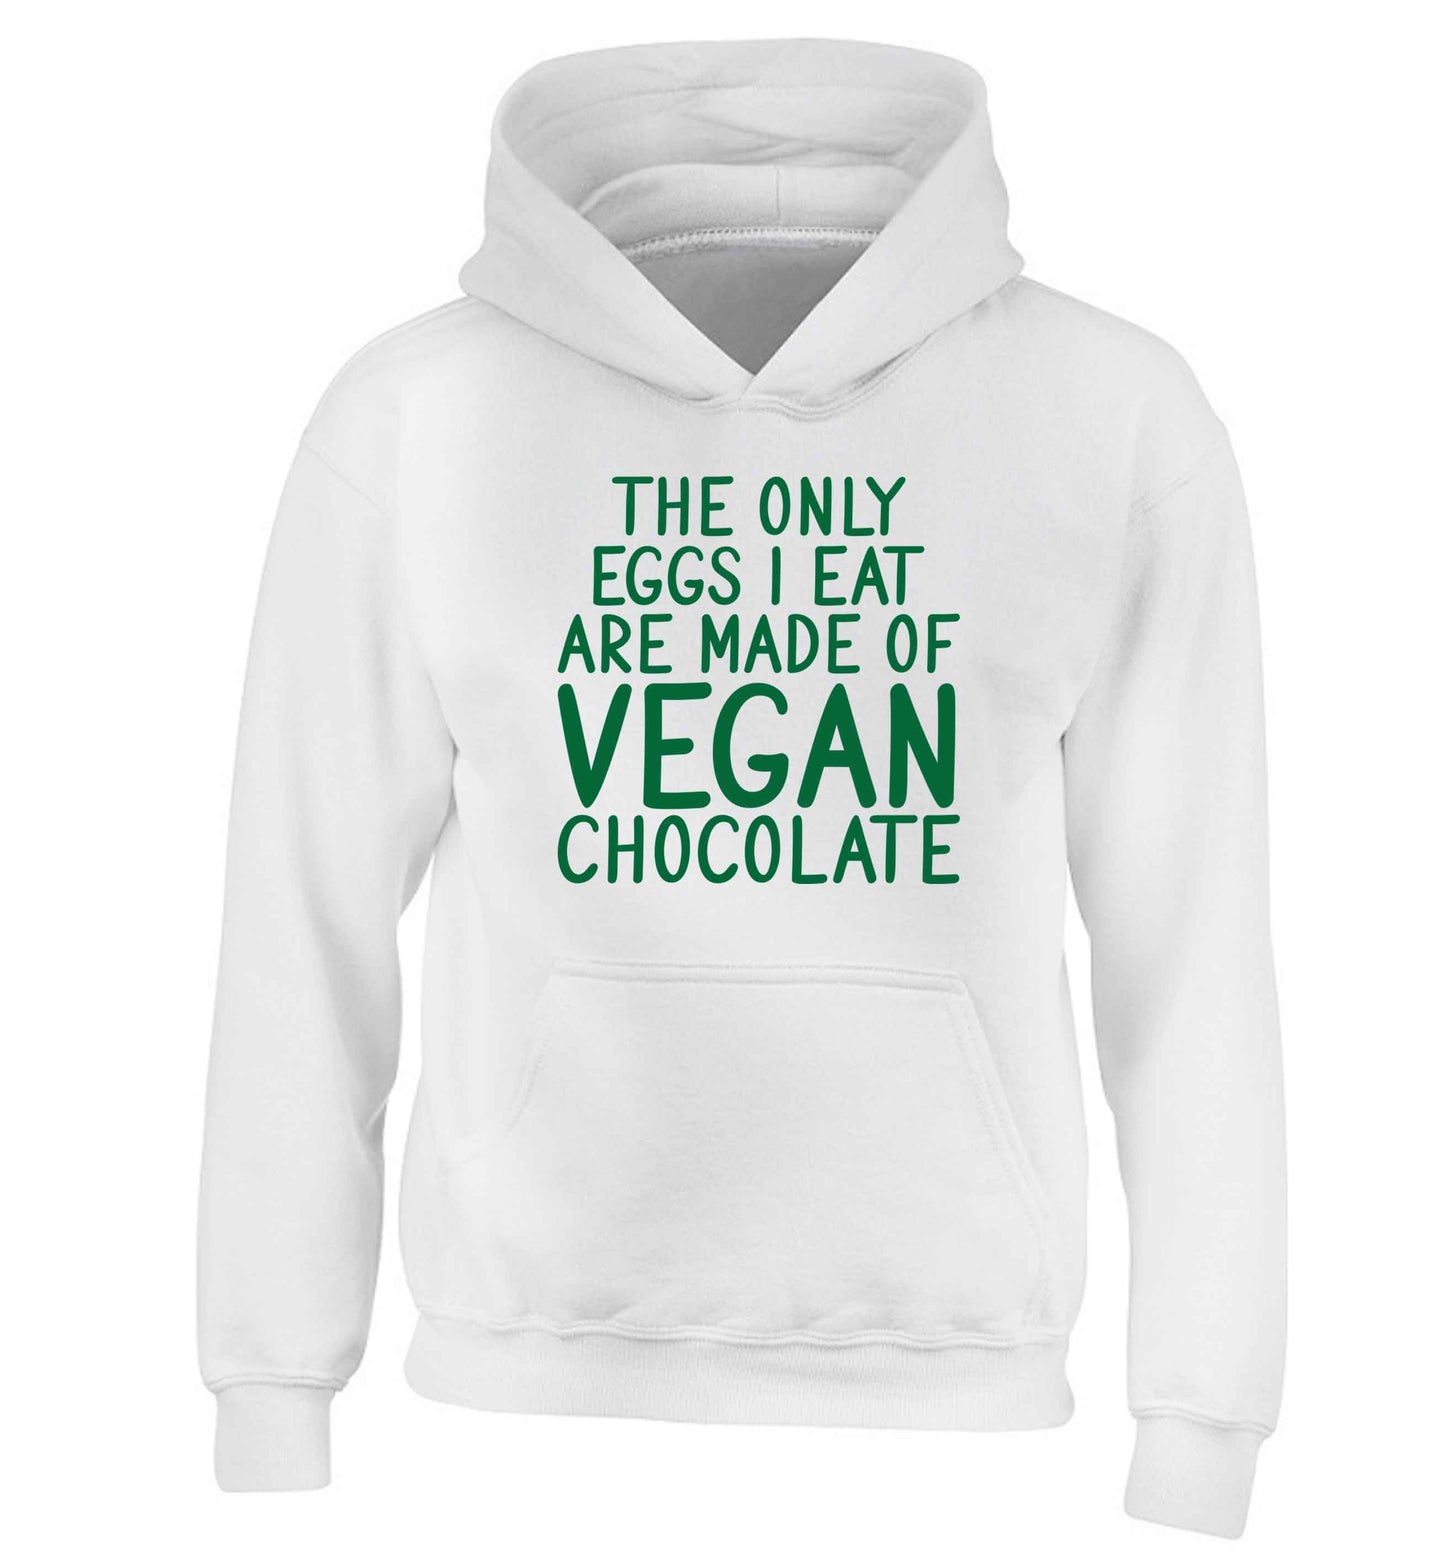 The only eggs I eat are made of vegan chocolate children's white hoodie 12-13 Years